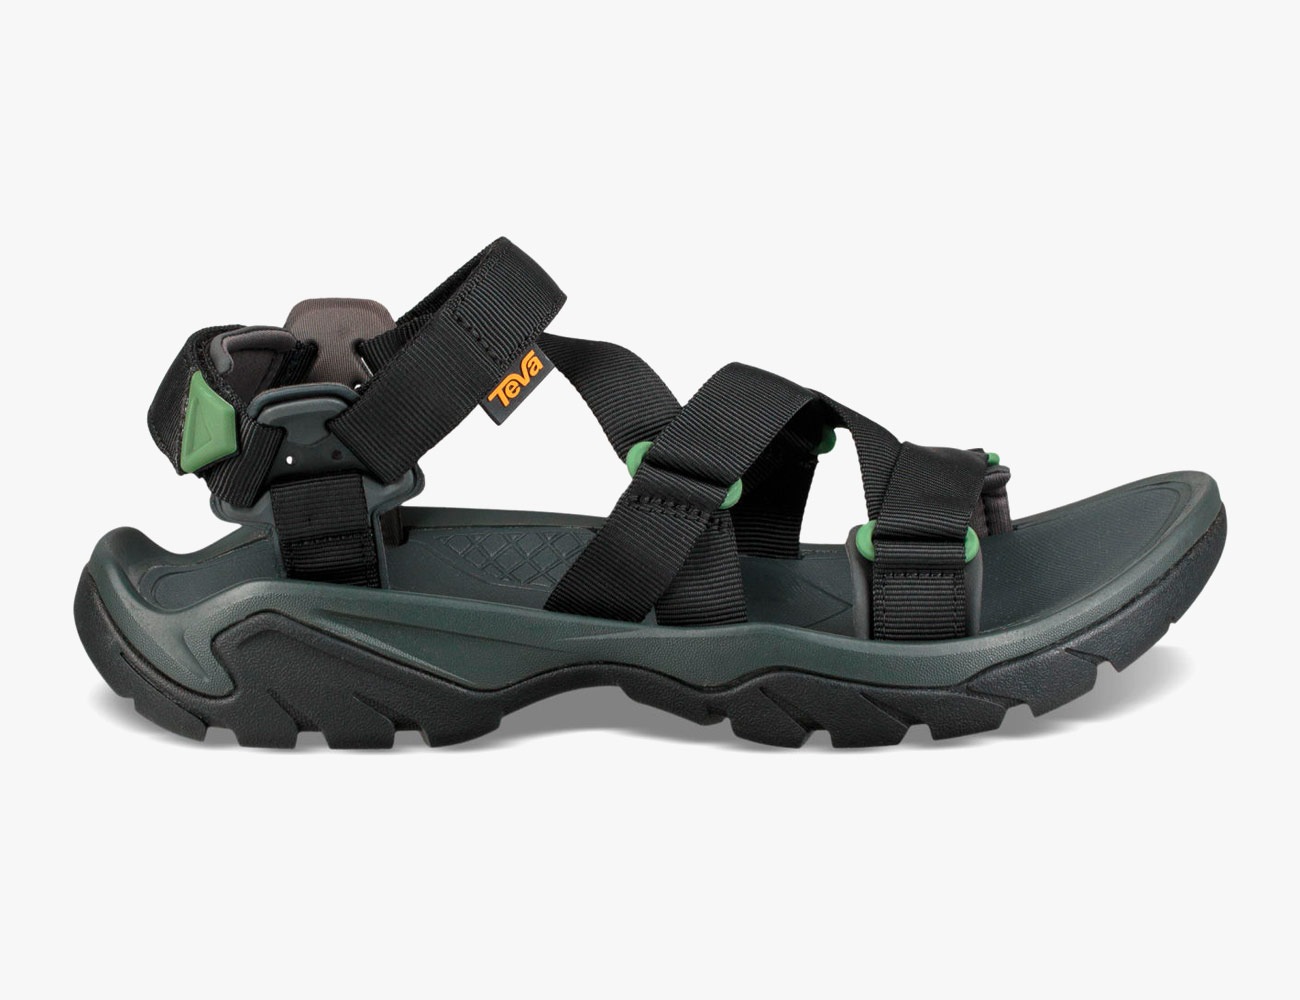 outdoor sandals with straps